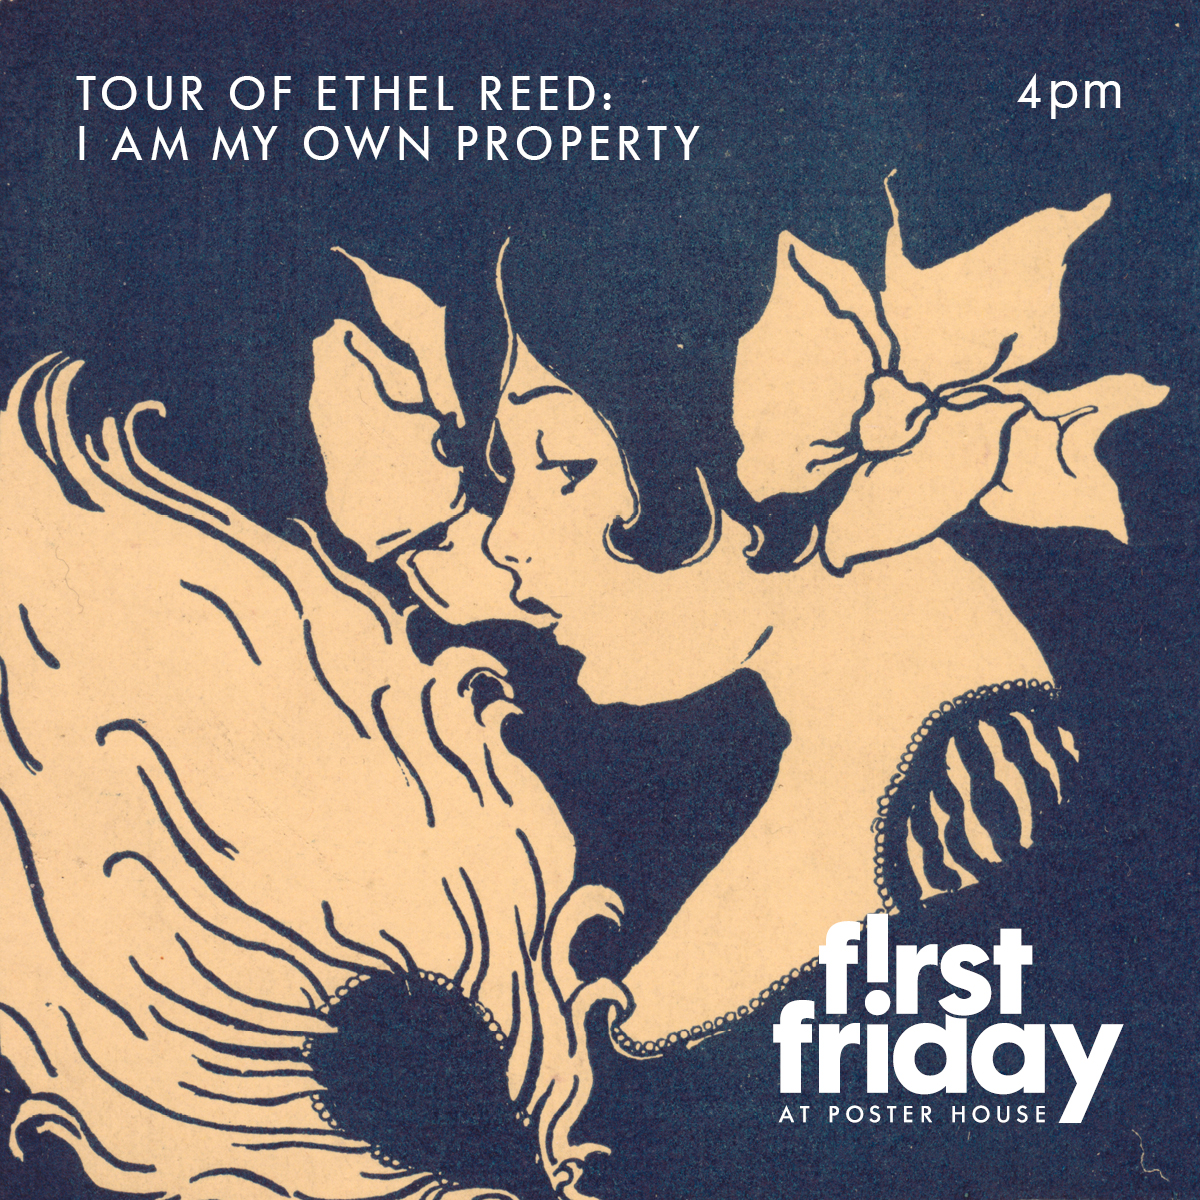 First Friday promotion event featuring a cropped magazine cover with a blue background. A young woman holding a large feathered fan. Text reads Tour of Ethel Reed: I am my own property 4pm First Friday at Poster House.